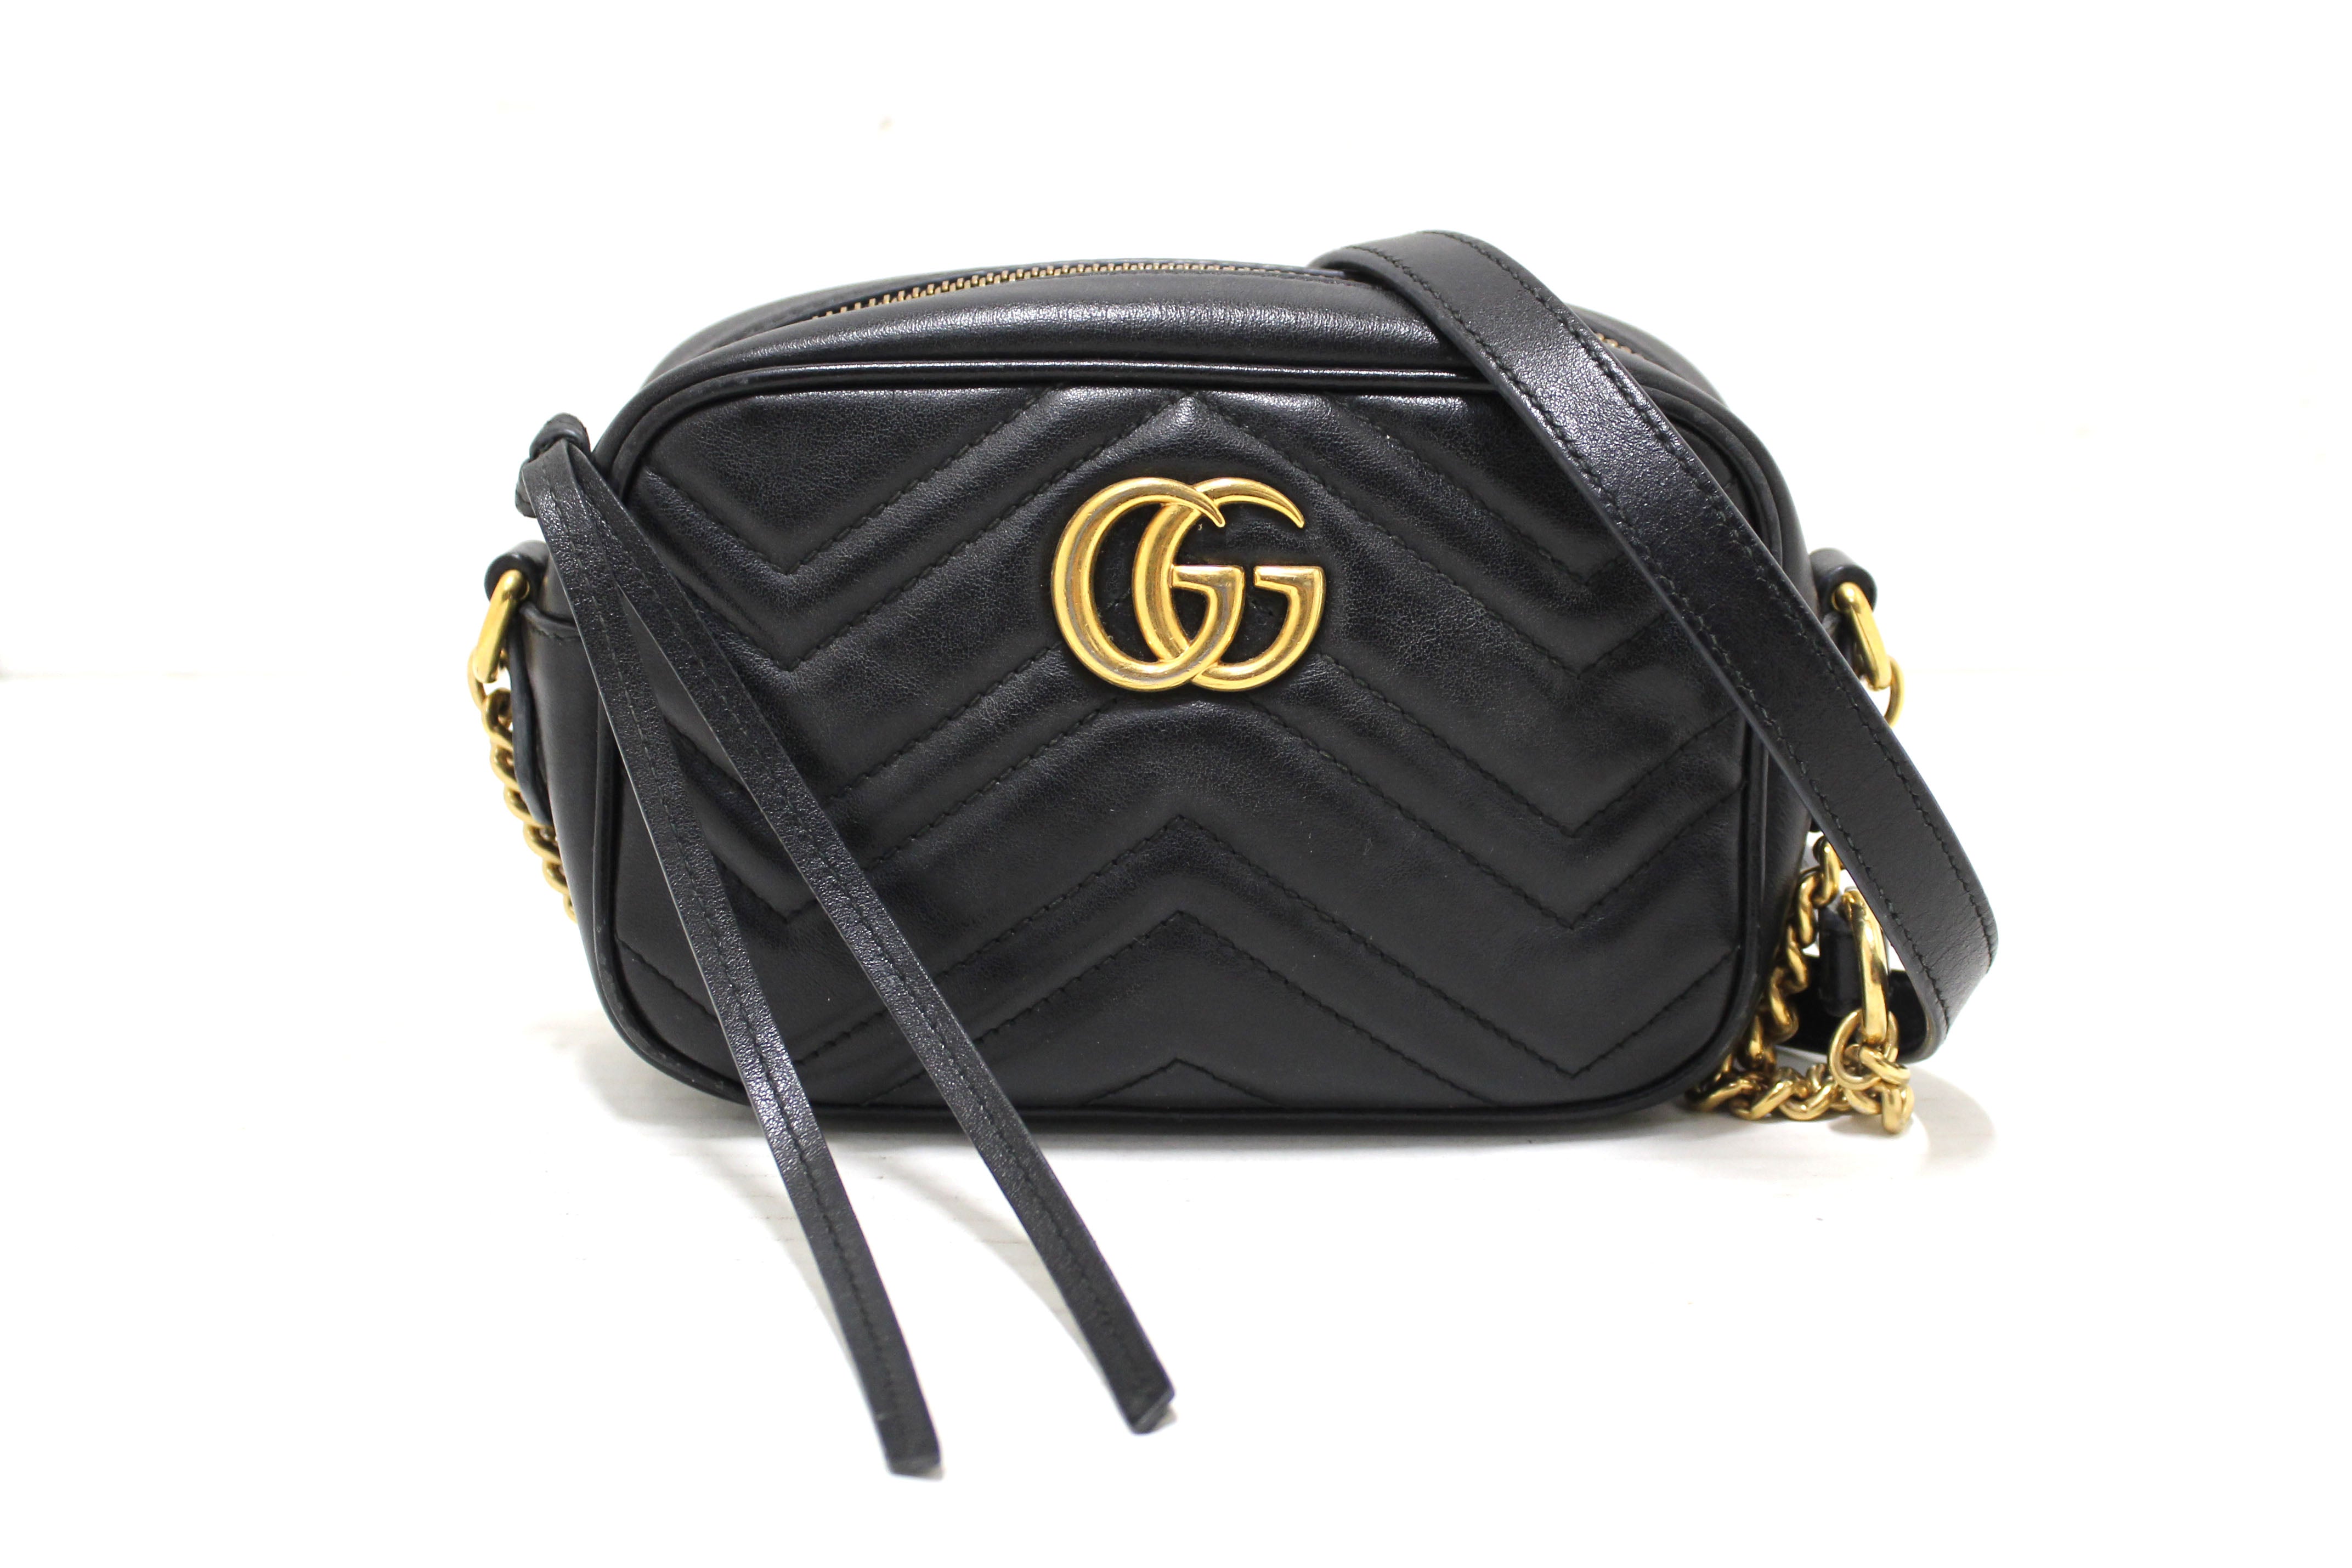 Gucci Marmont bag in chevron leather with piping